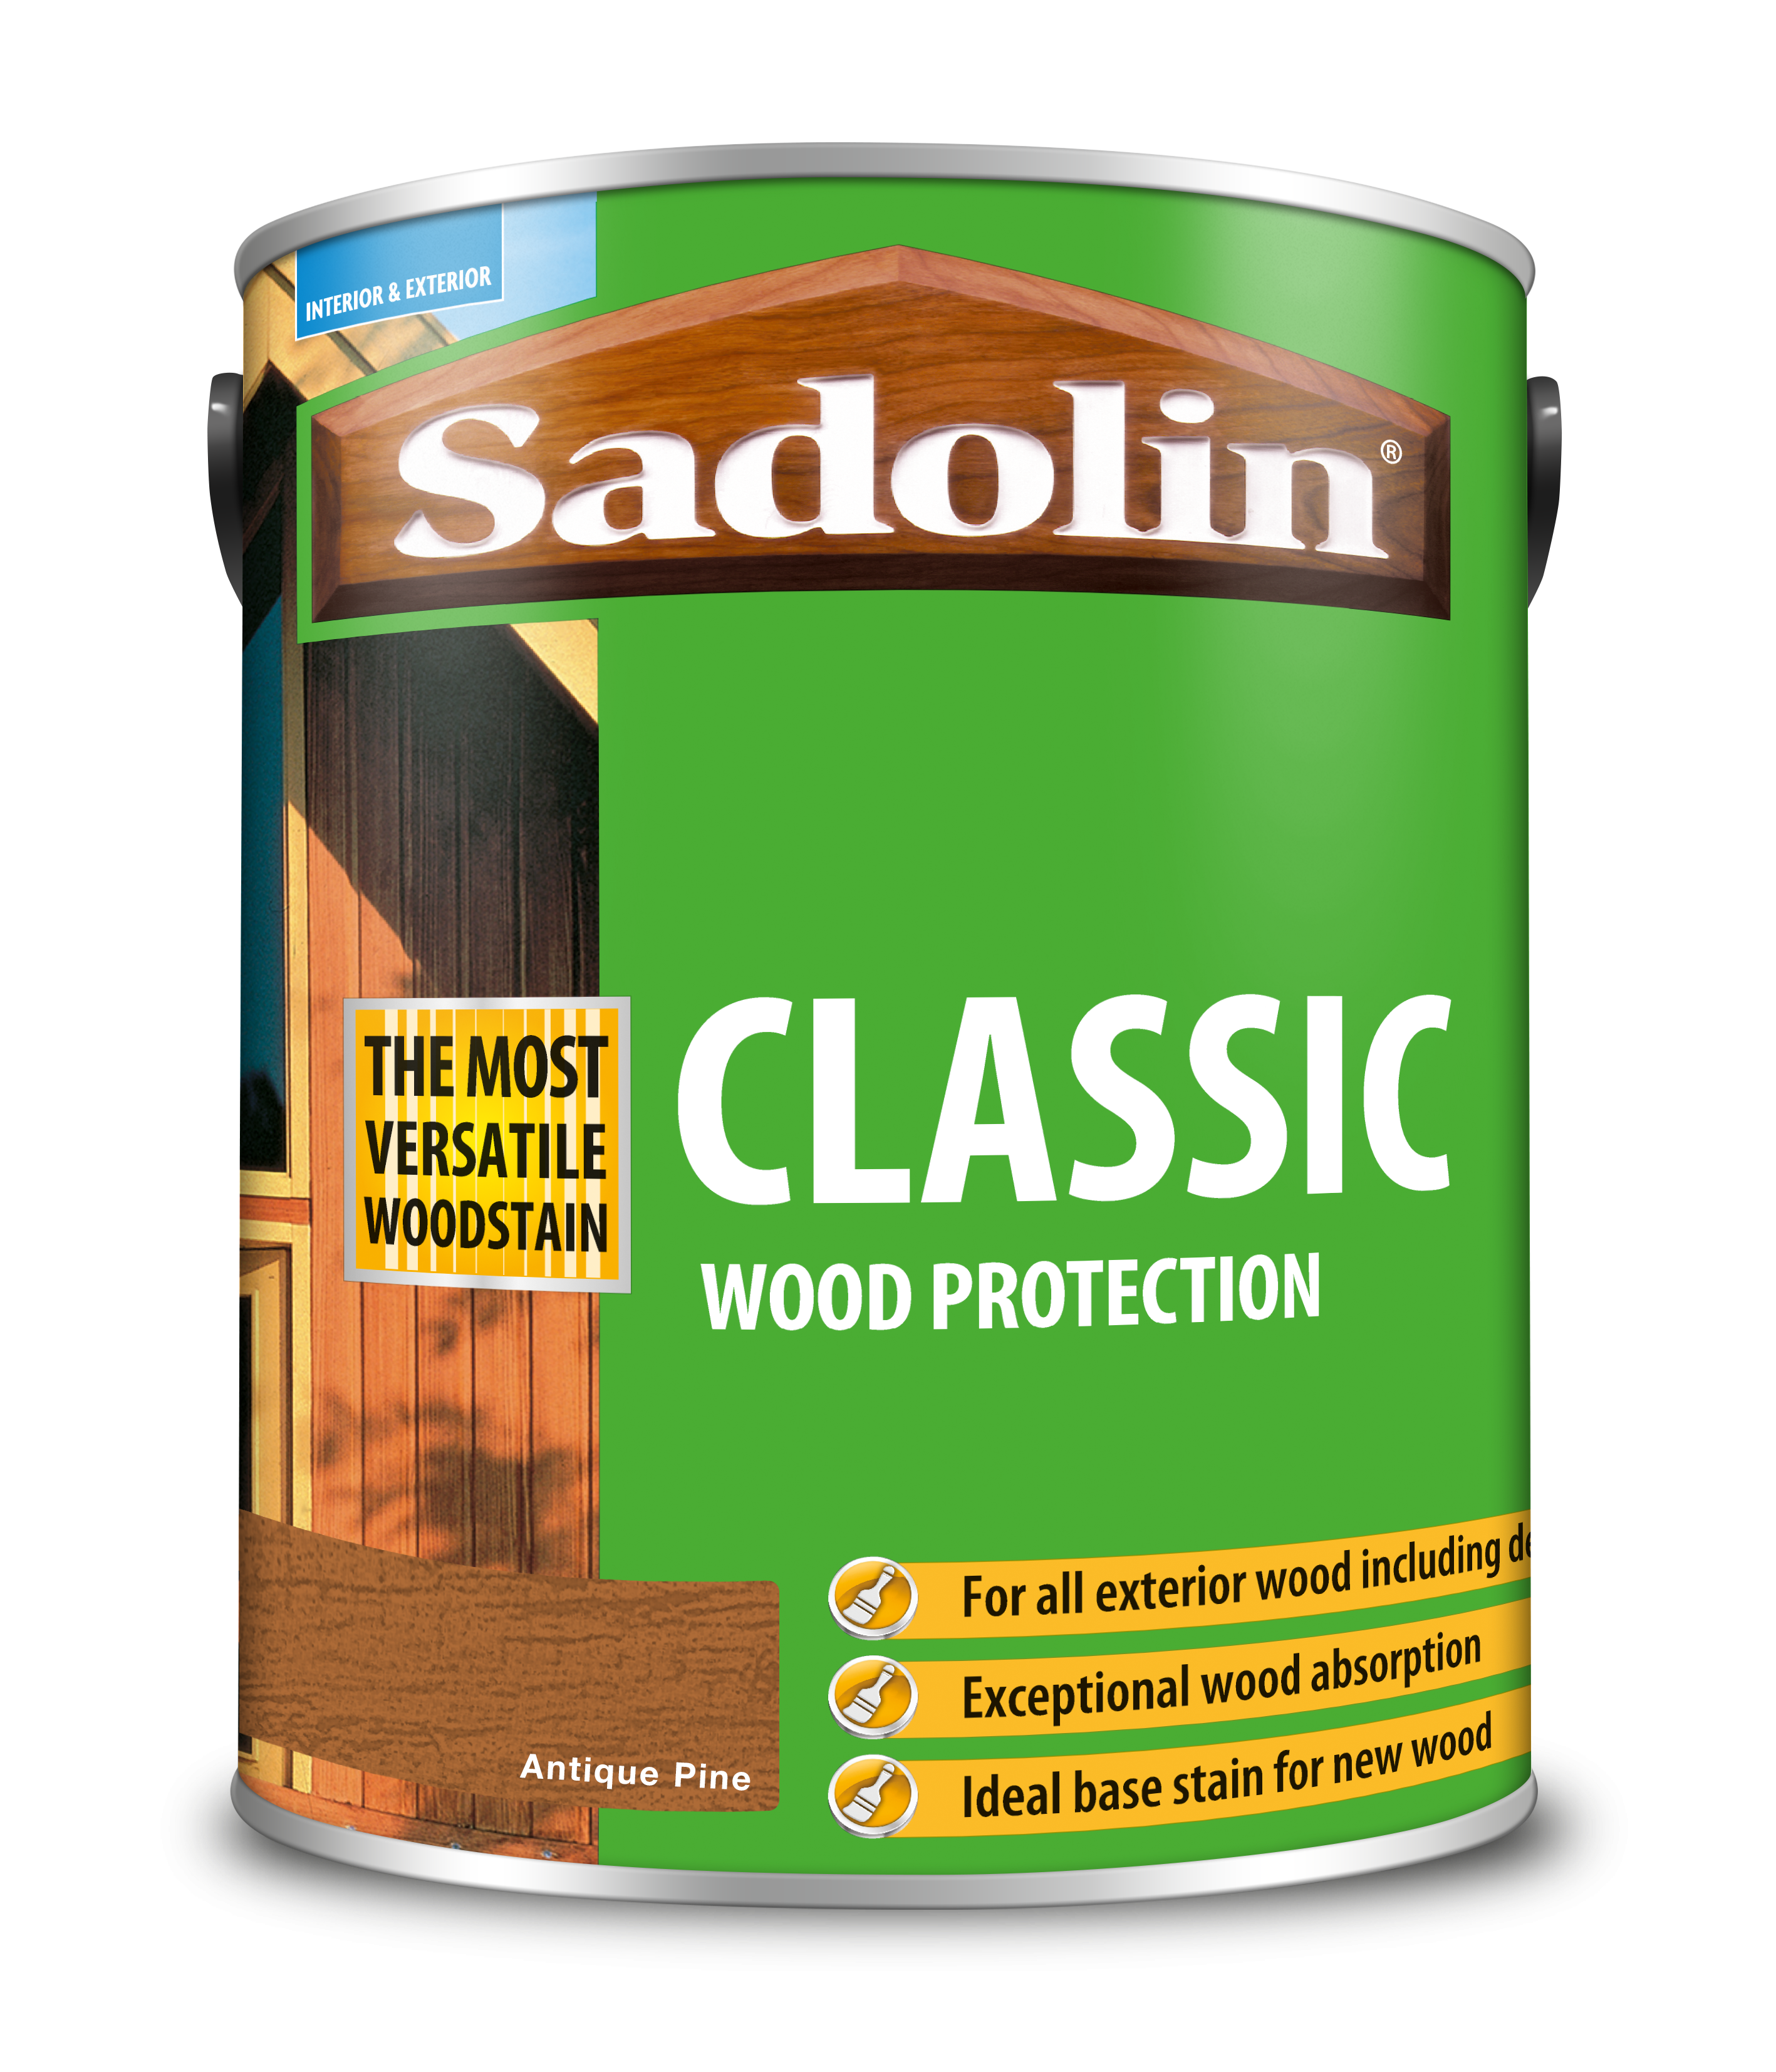 Sadolin Classic All Purpose Woodstain Antique Pine 5L [MPPSPPC]  5028459